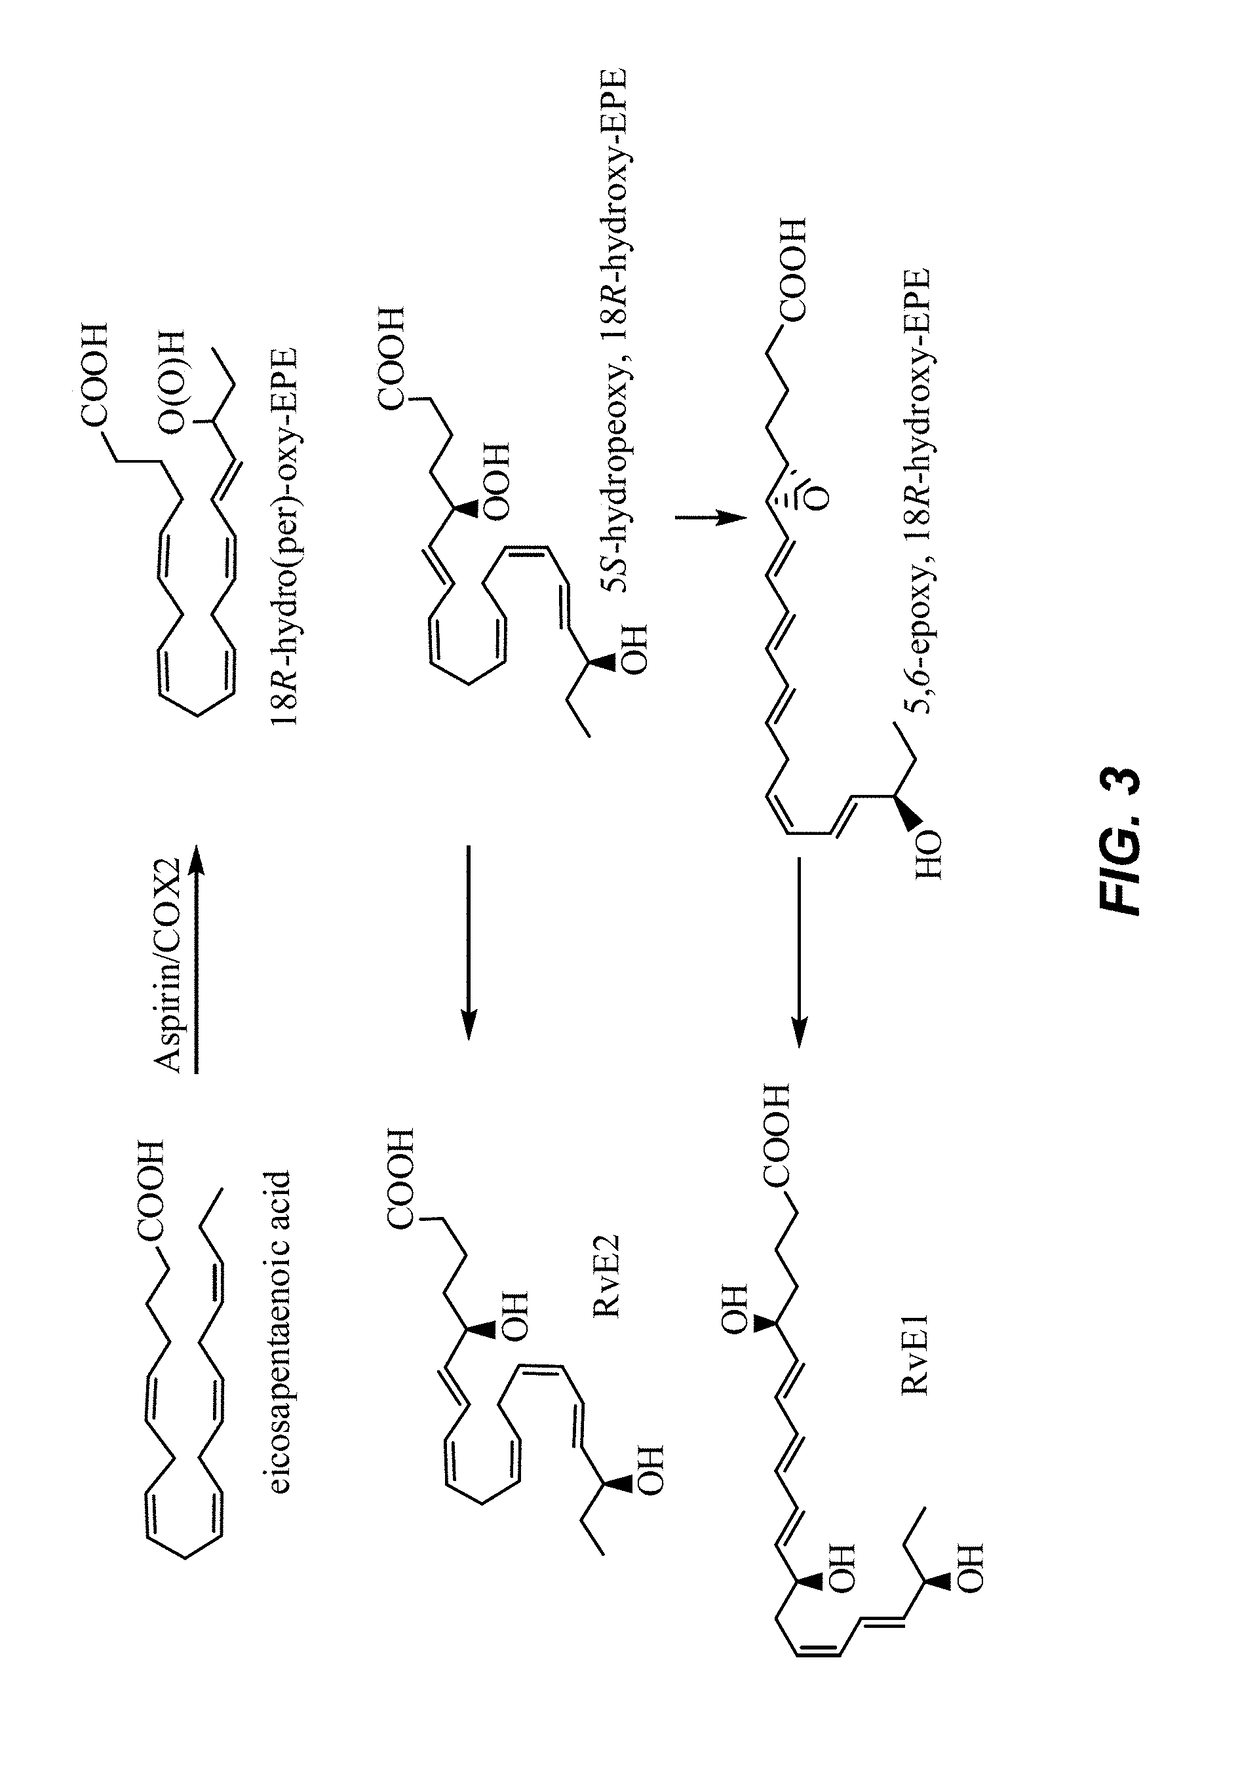 Composition of bioactive lipids and methods of use thereof